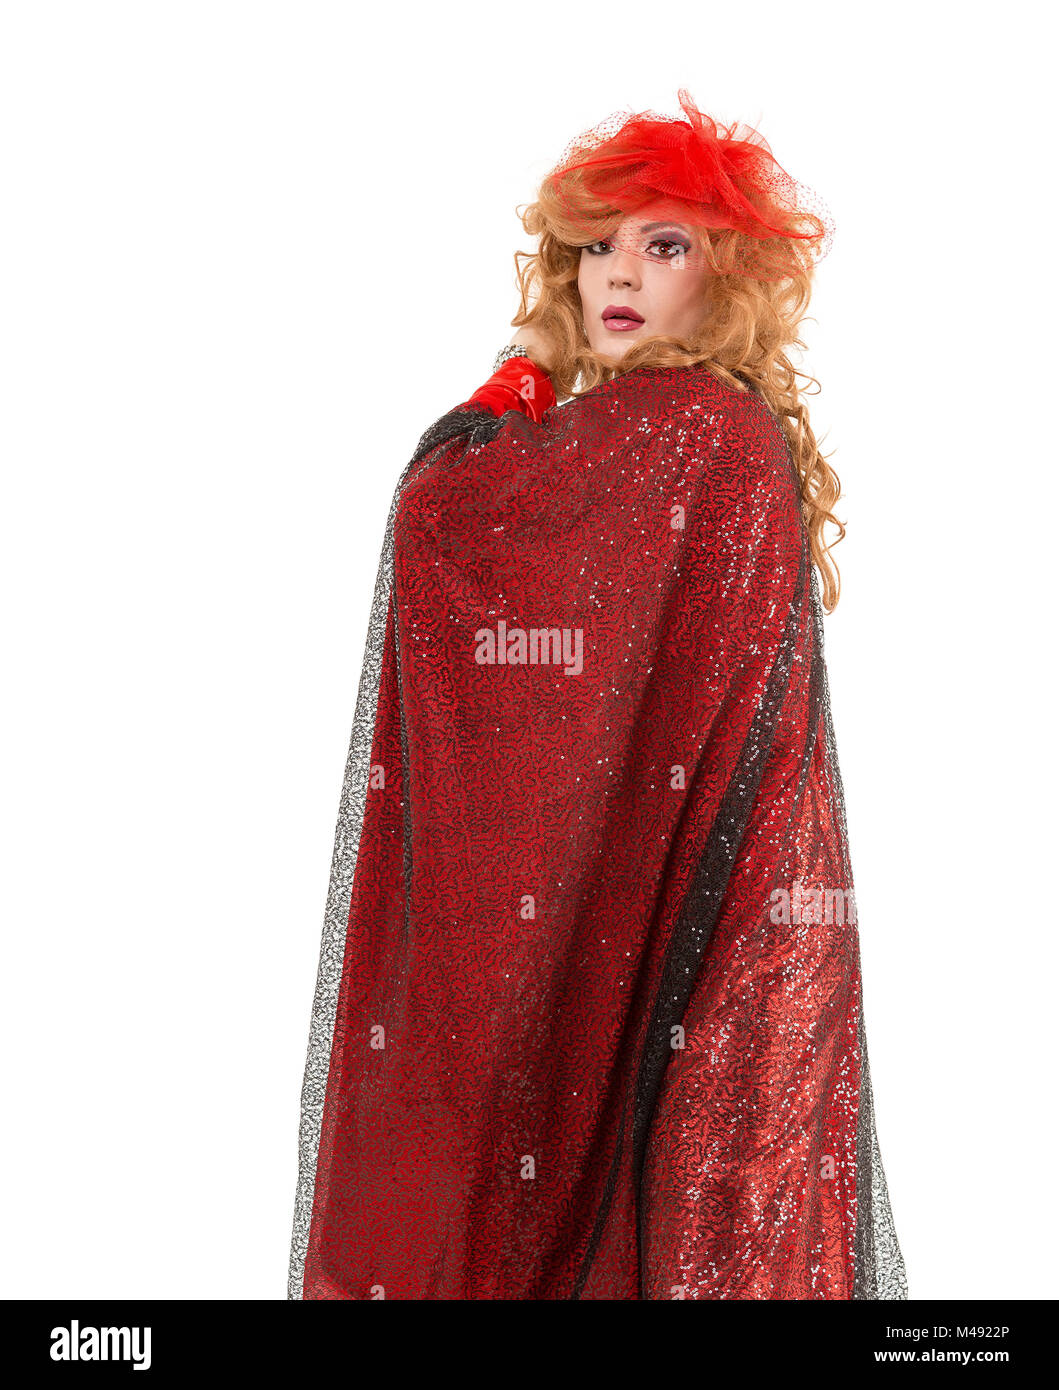 Portrait Drag Queen in Woman Red Dress Performing Stock Photo